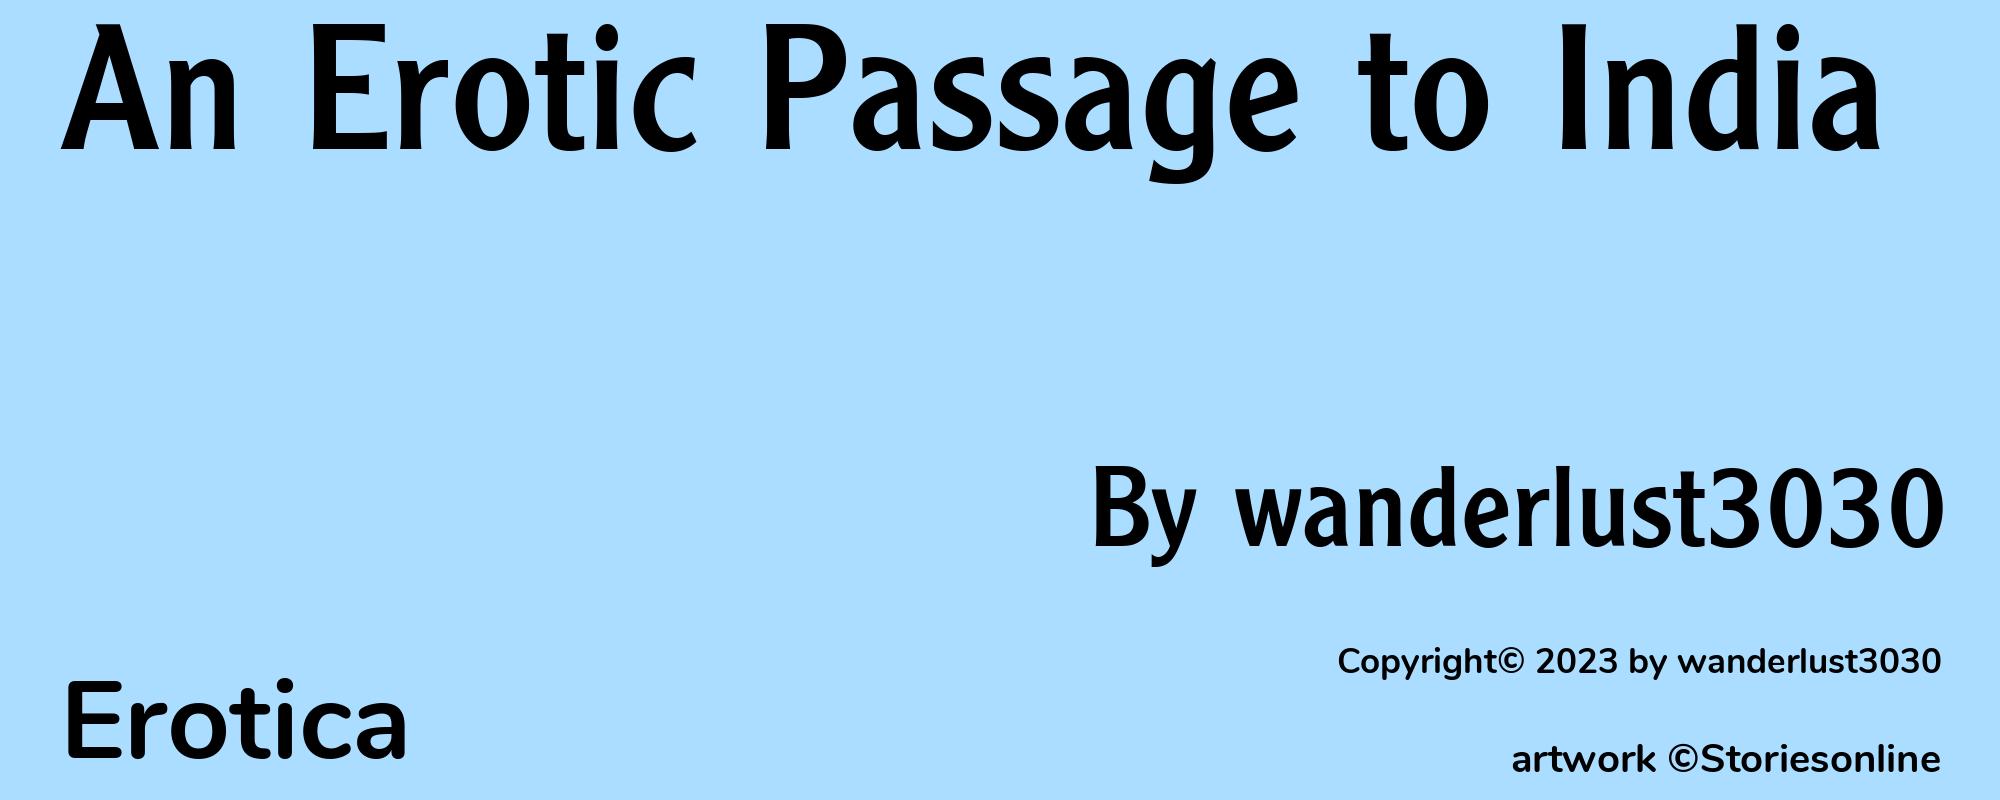 An Erotic Passage to India - Cover